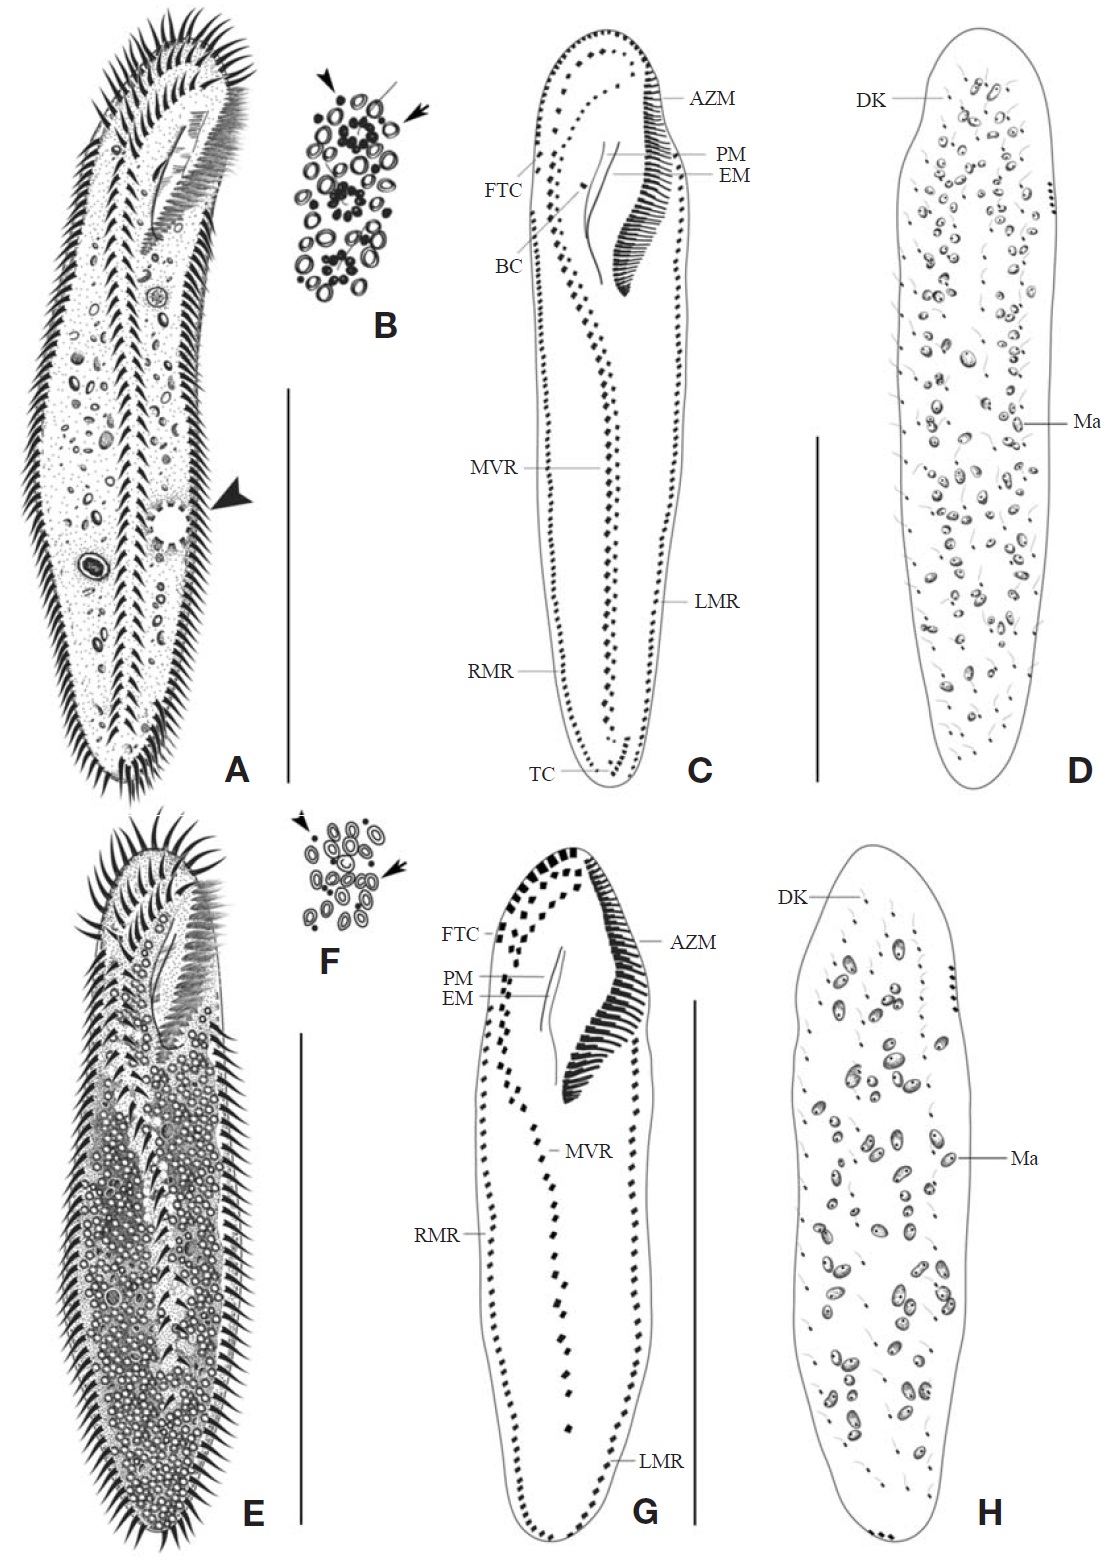 Morphology and infraciliature of Pseudokeronopsis carnea and Uroleptopsis citrina from live specimens (A B E F) and afterprotargol impregnation (C D G H). A-D Pseudokeronopsis carnea: A Ventral view of live specimen arrowhead in (A) denotes CV;B Two types of granules; infraciliature of the ventral (C) and dorsal (D) sides. E-H Uroleptopsis citrina: E Ventral view of livespecimen; F Two types of granules; infraciliature of the ventral (G) and dorsal (H) sides. AZM adoral zone of membranelles; BCbuccal cirri; CV contractile vacuole; DK dorsal kineties; EM endoral membrane; FTC frontoterminal cirri; LMR left marginal row;Ma macronuclei; MVR midventral row; PM paroral membrane; RMR; right marginal row; TC transverse cirri. Scale bars=100 μm.